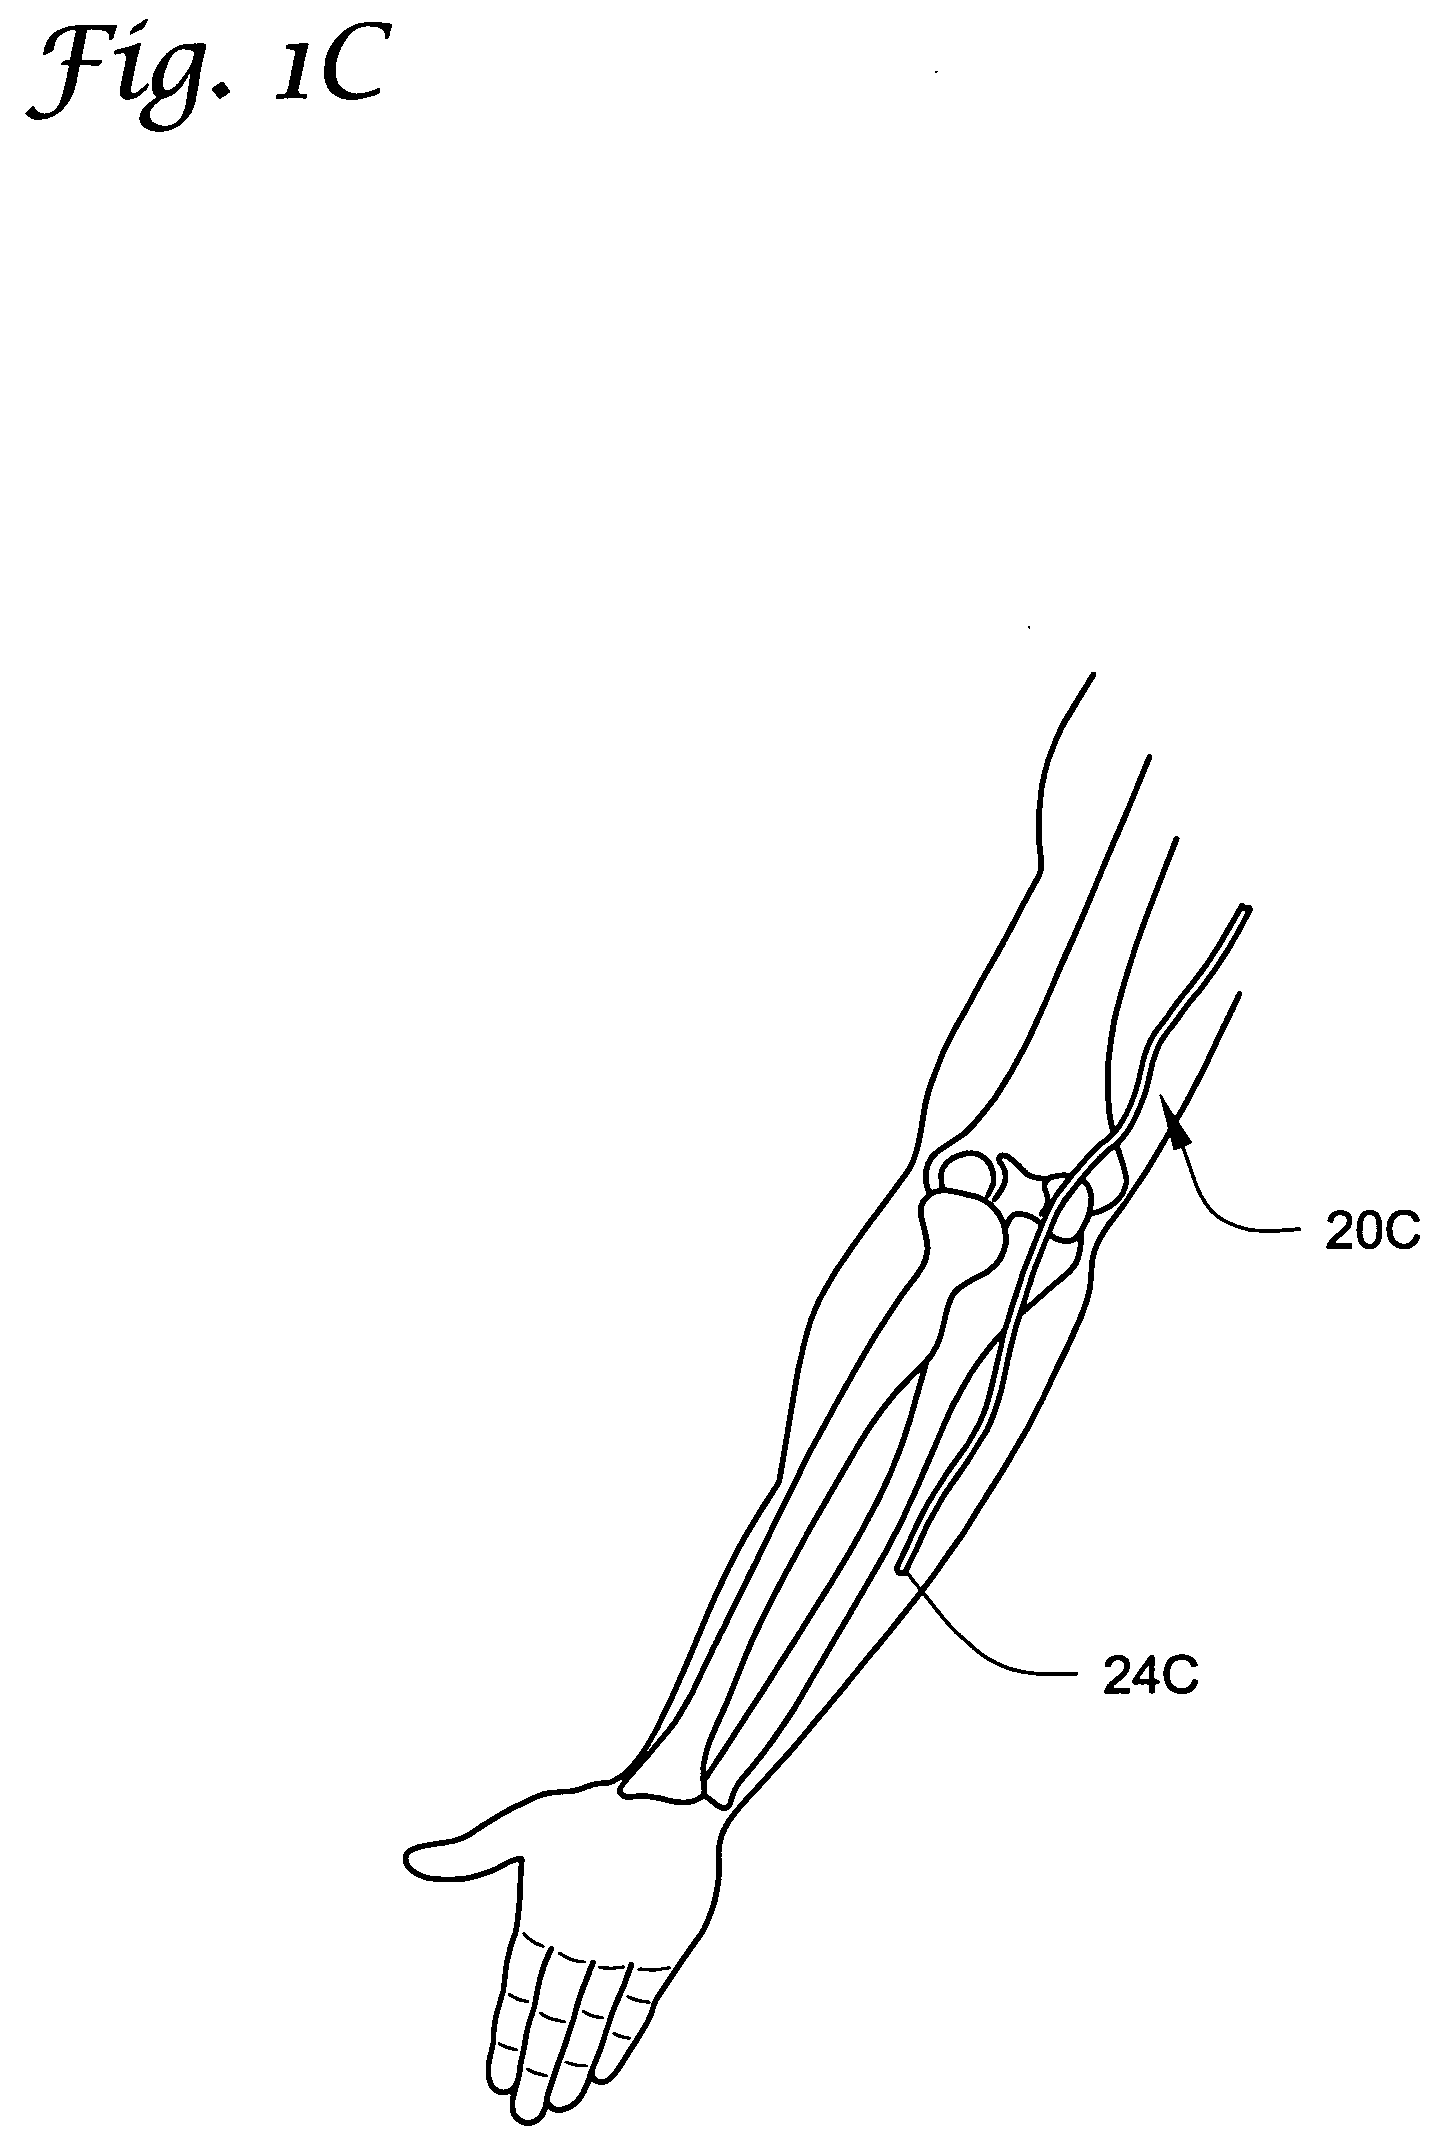 Catheters incorporating valves and permeable membranes